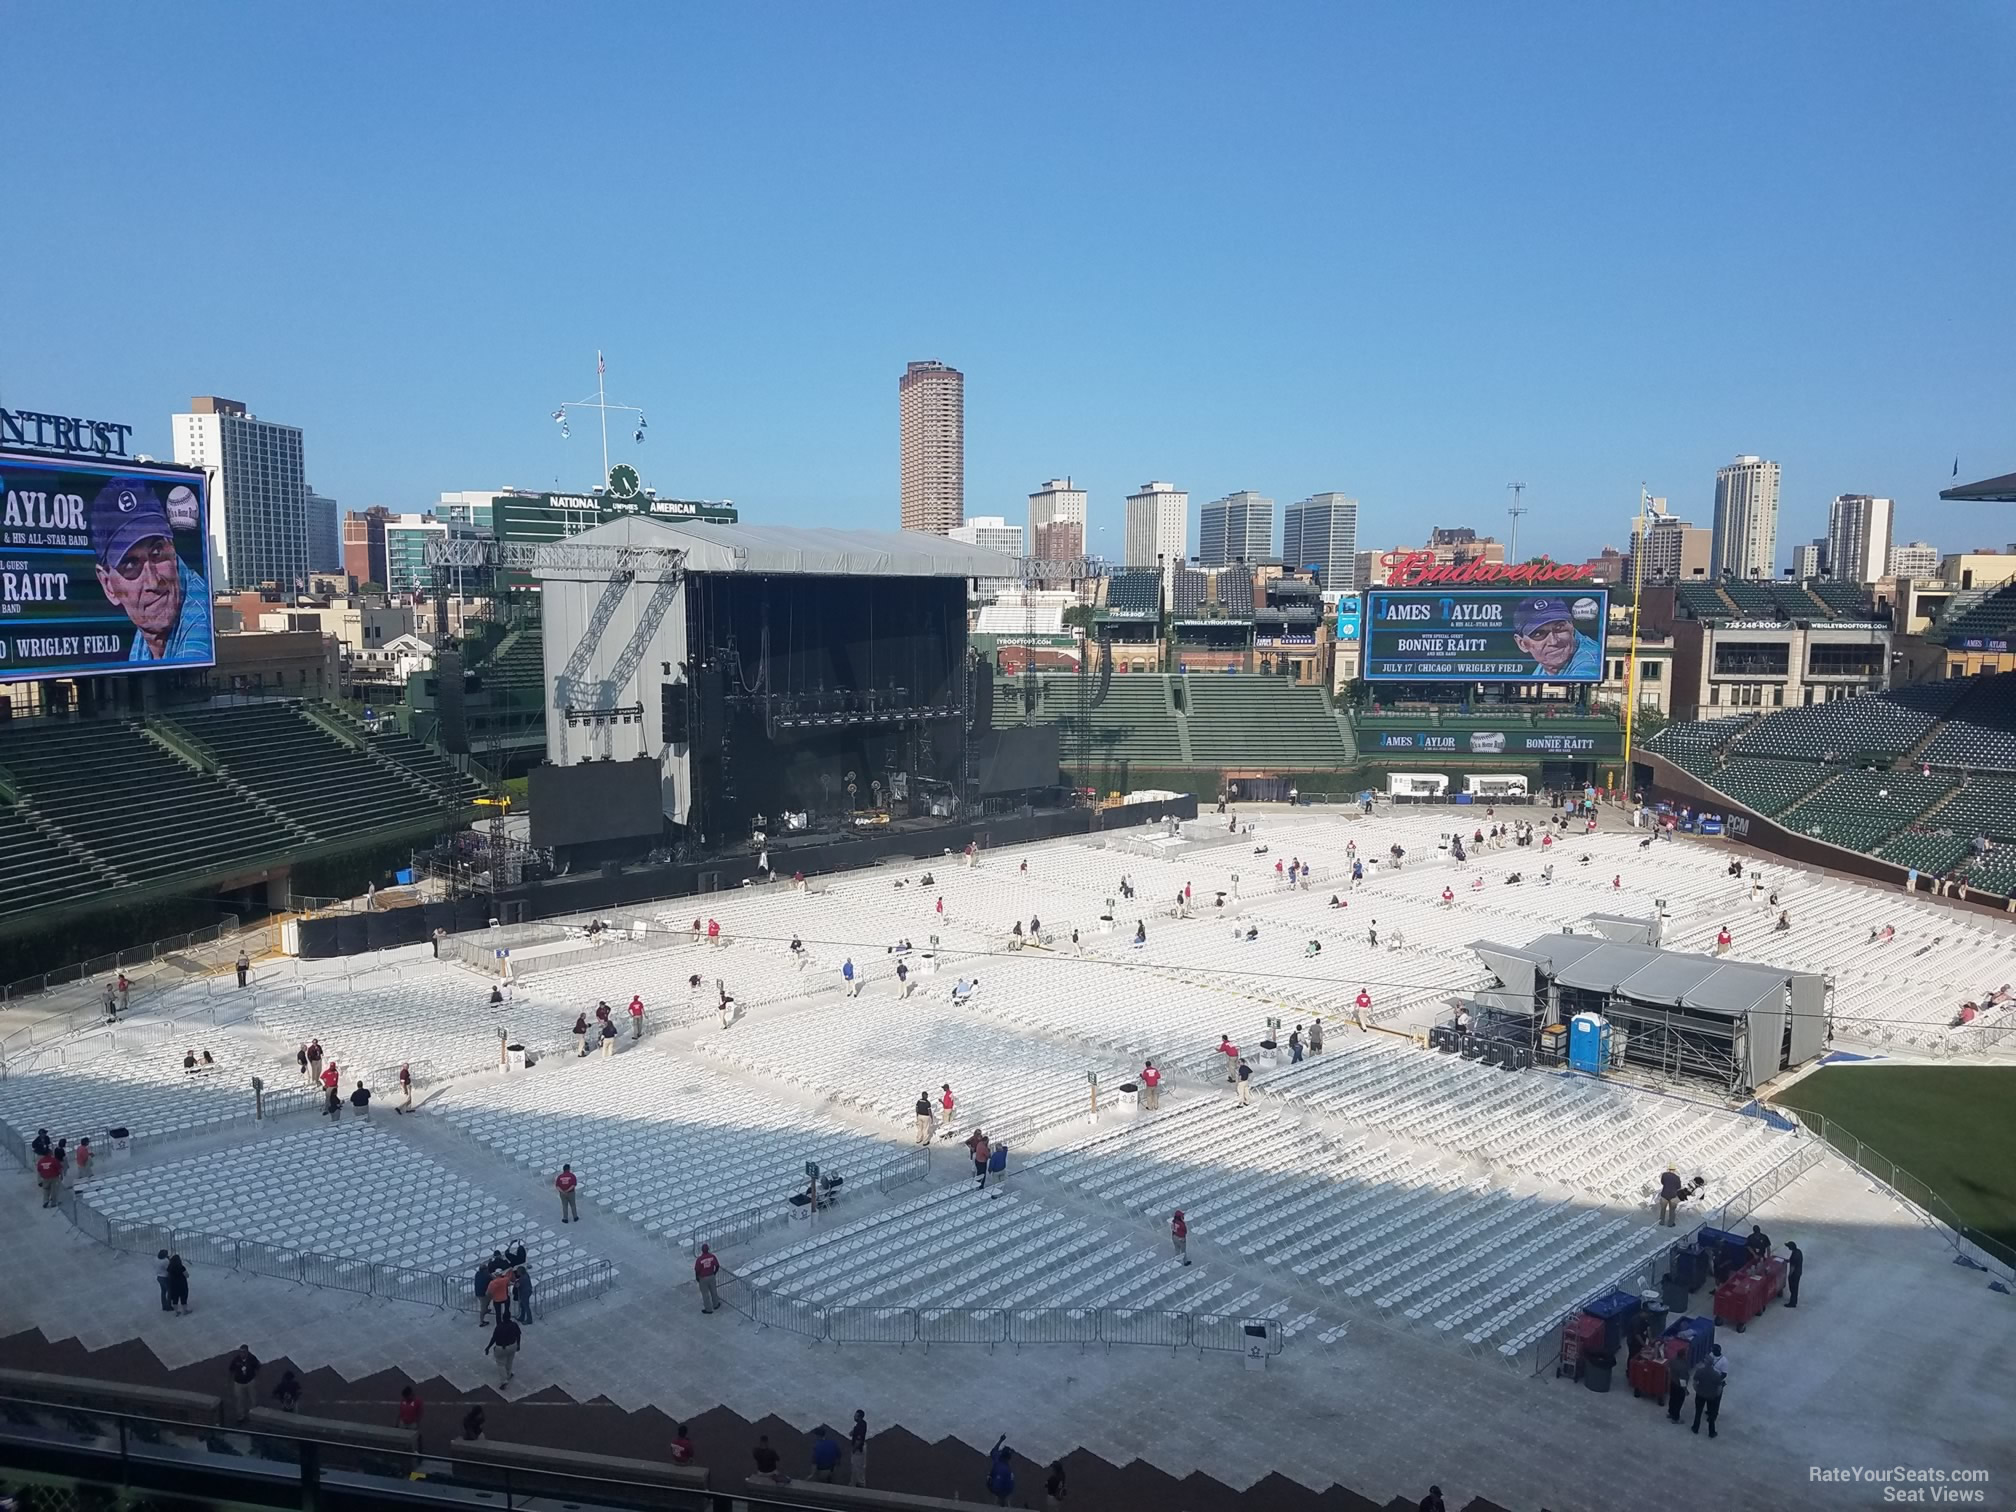 section 308, row 7 seat view  for concert - wrigley field